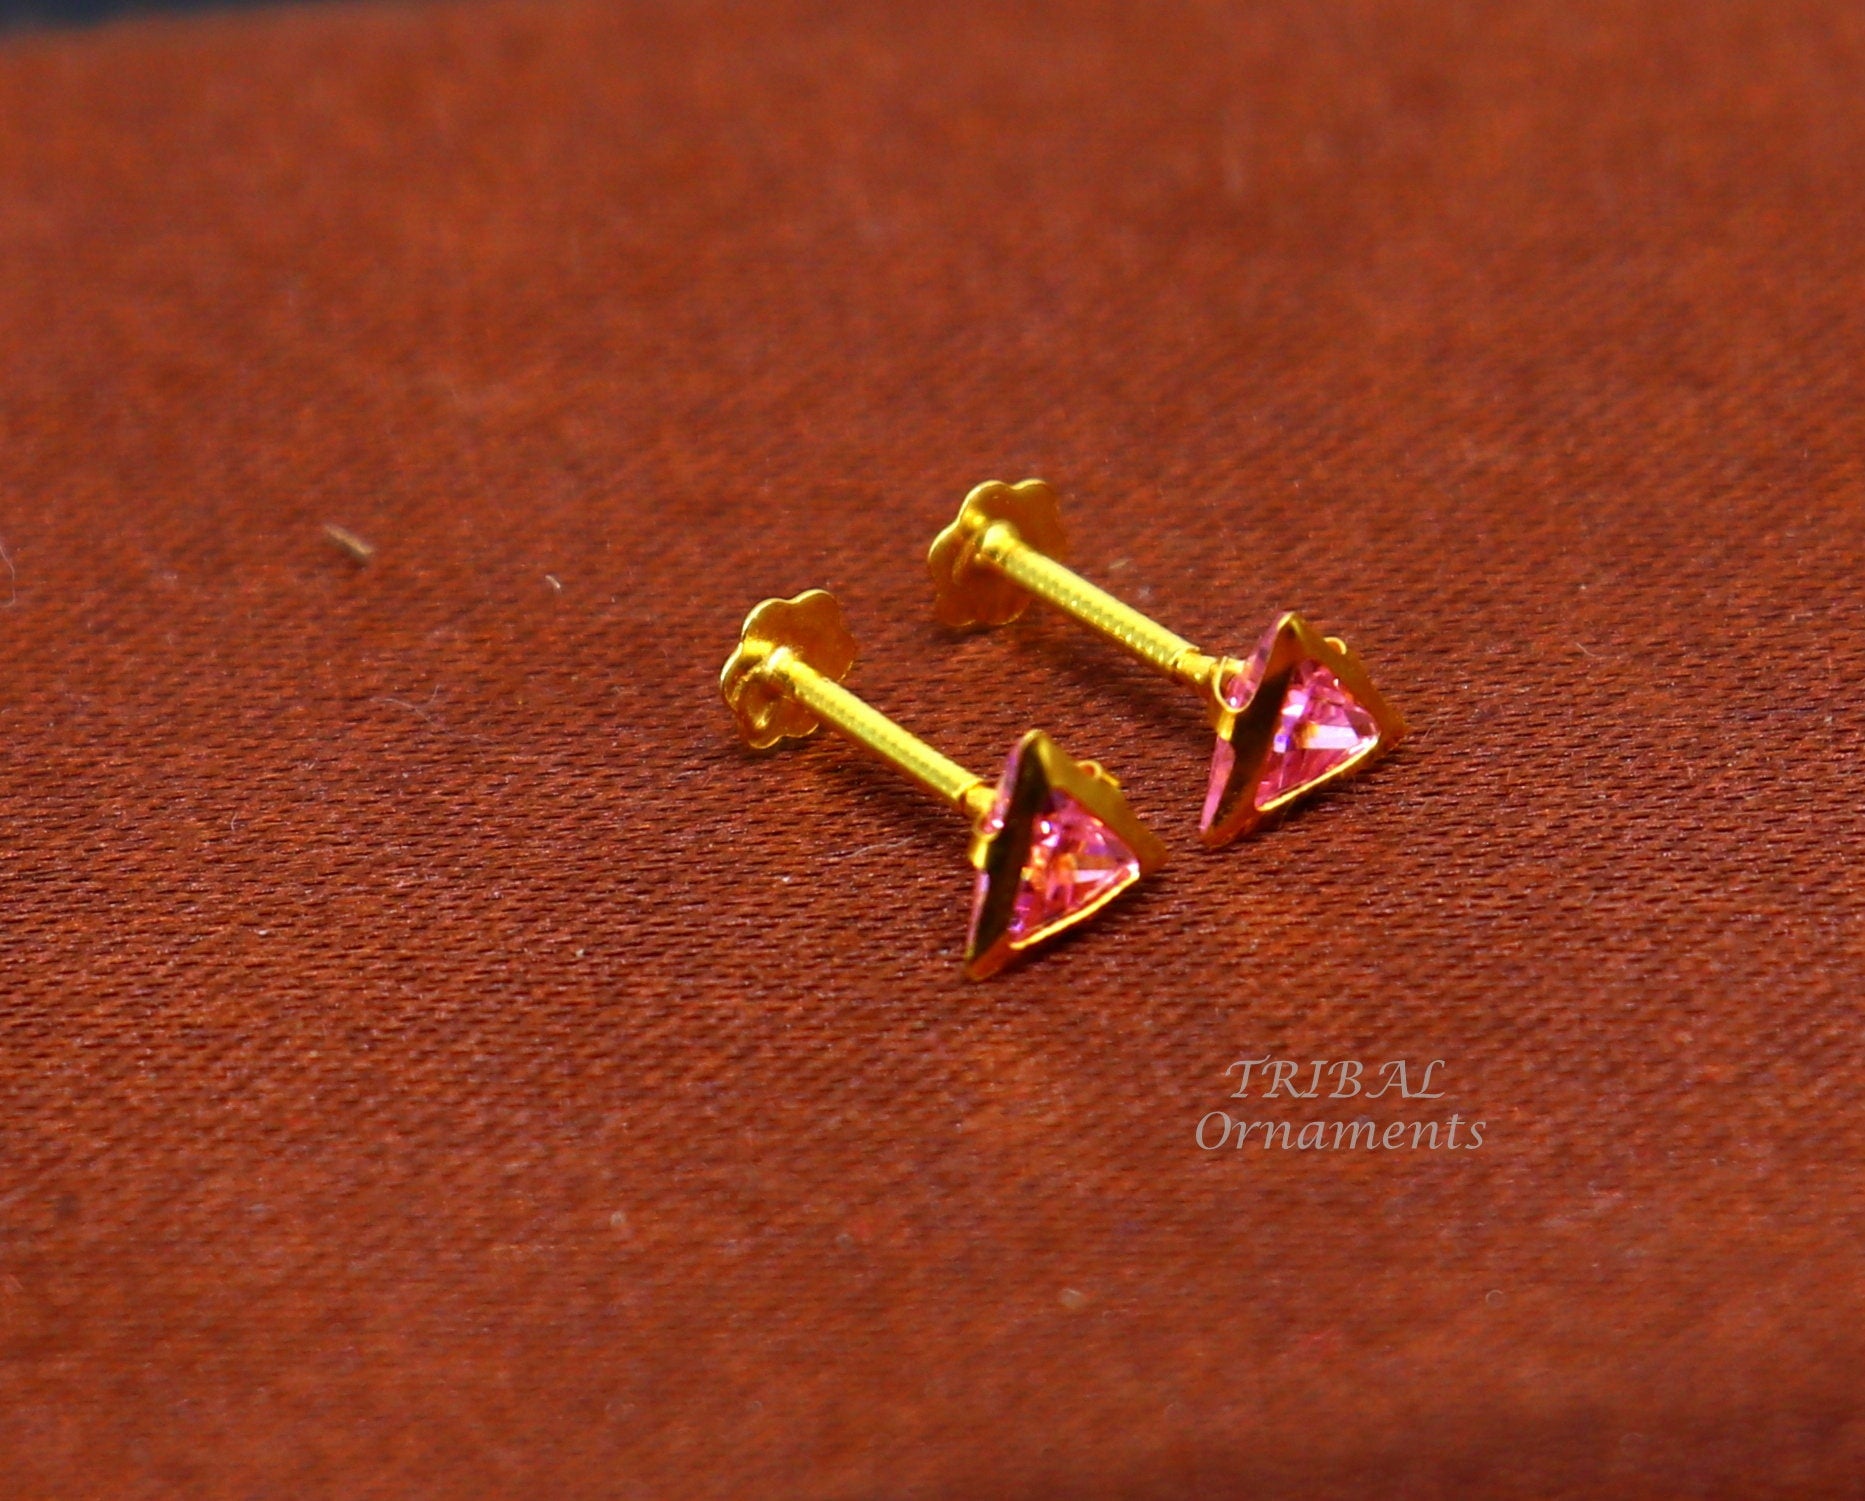 4mm tiny single pink stone handmade 18kt yellow gold combo jewelry we can use as stud or nose stud , baby stud cartilage jewelry er159 - TRIBAL ORNAMENTS